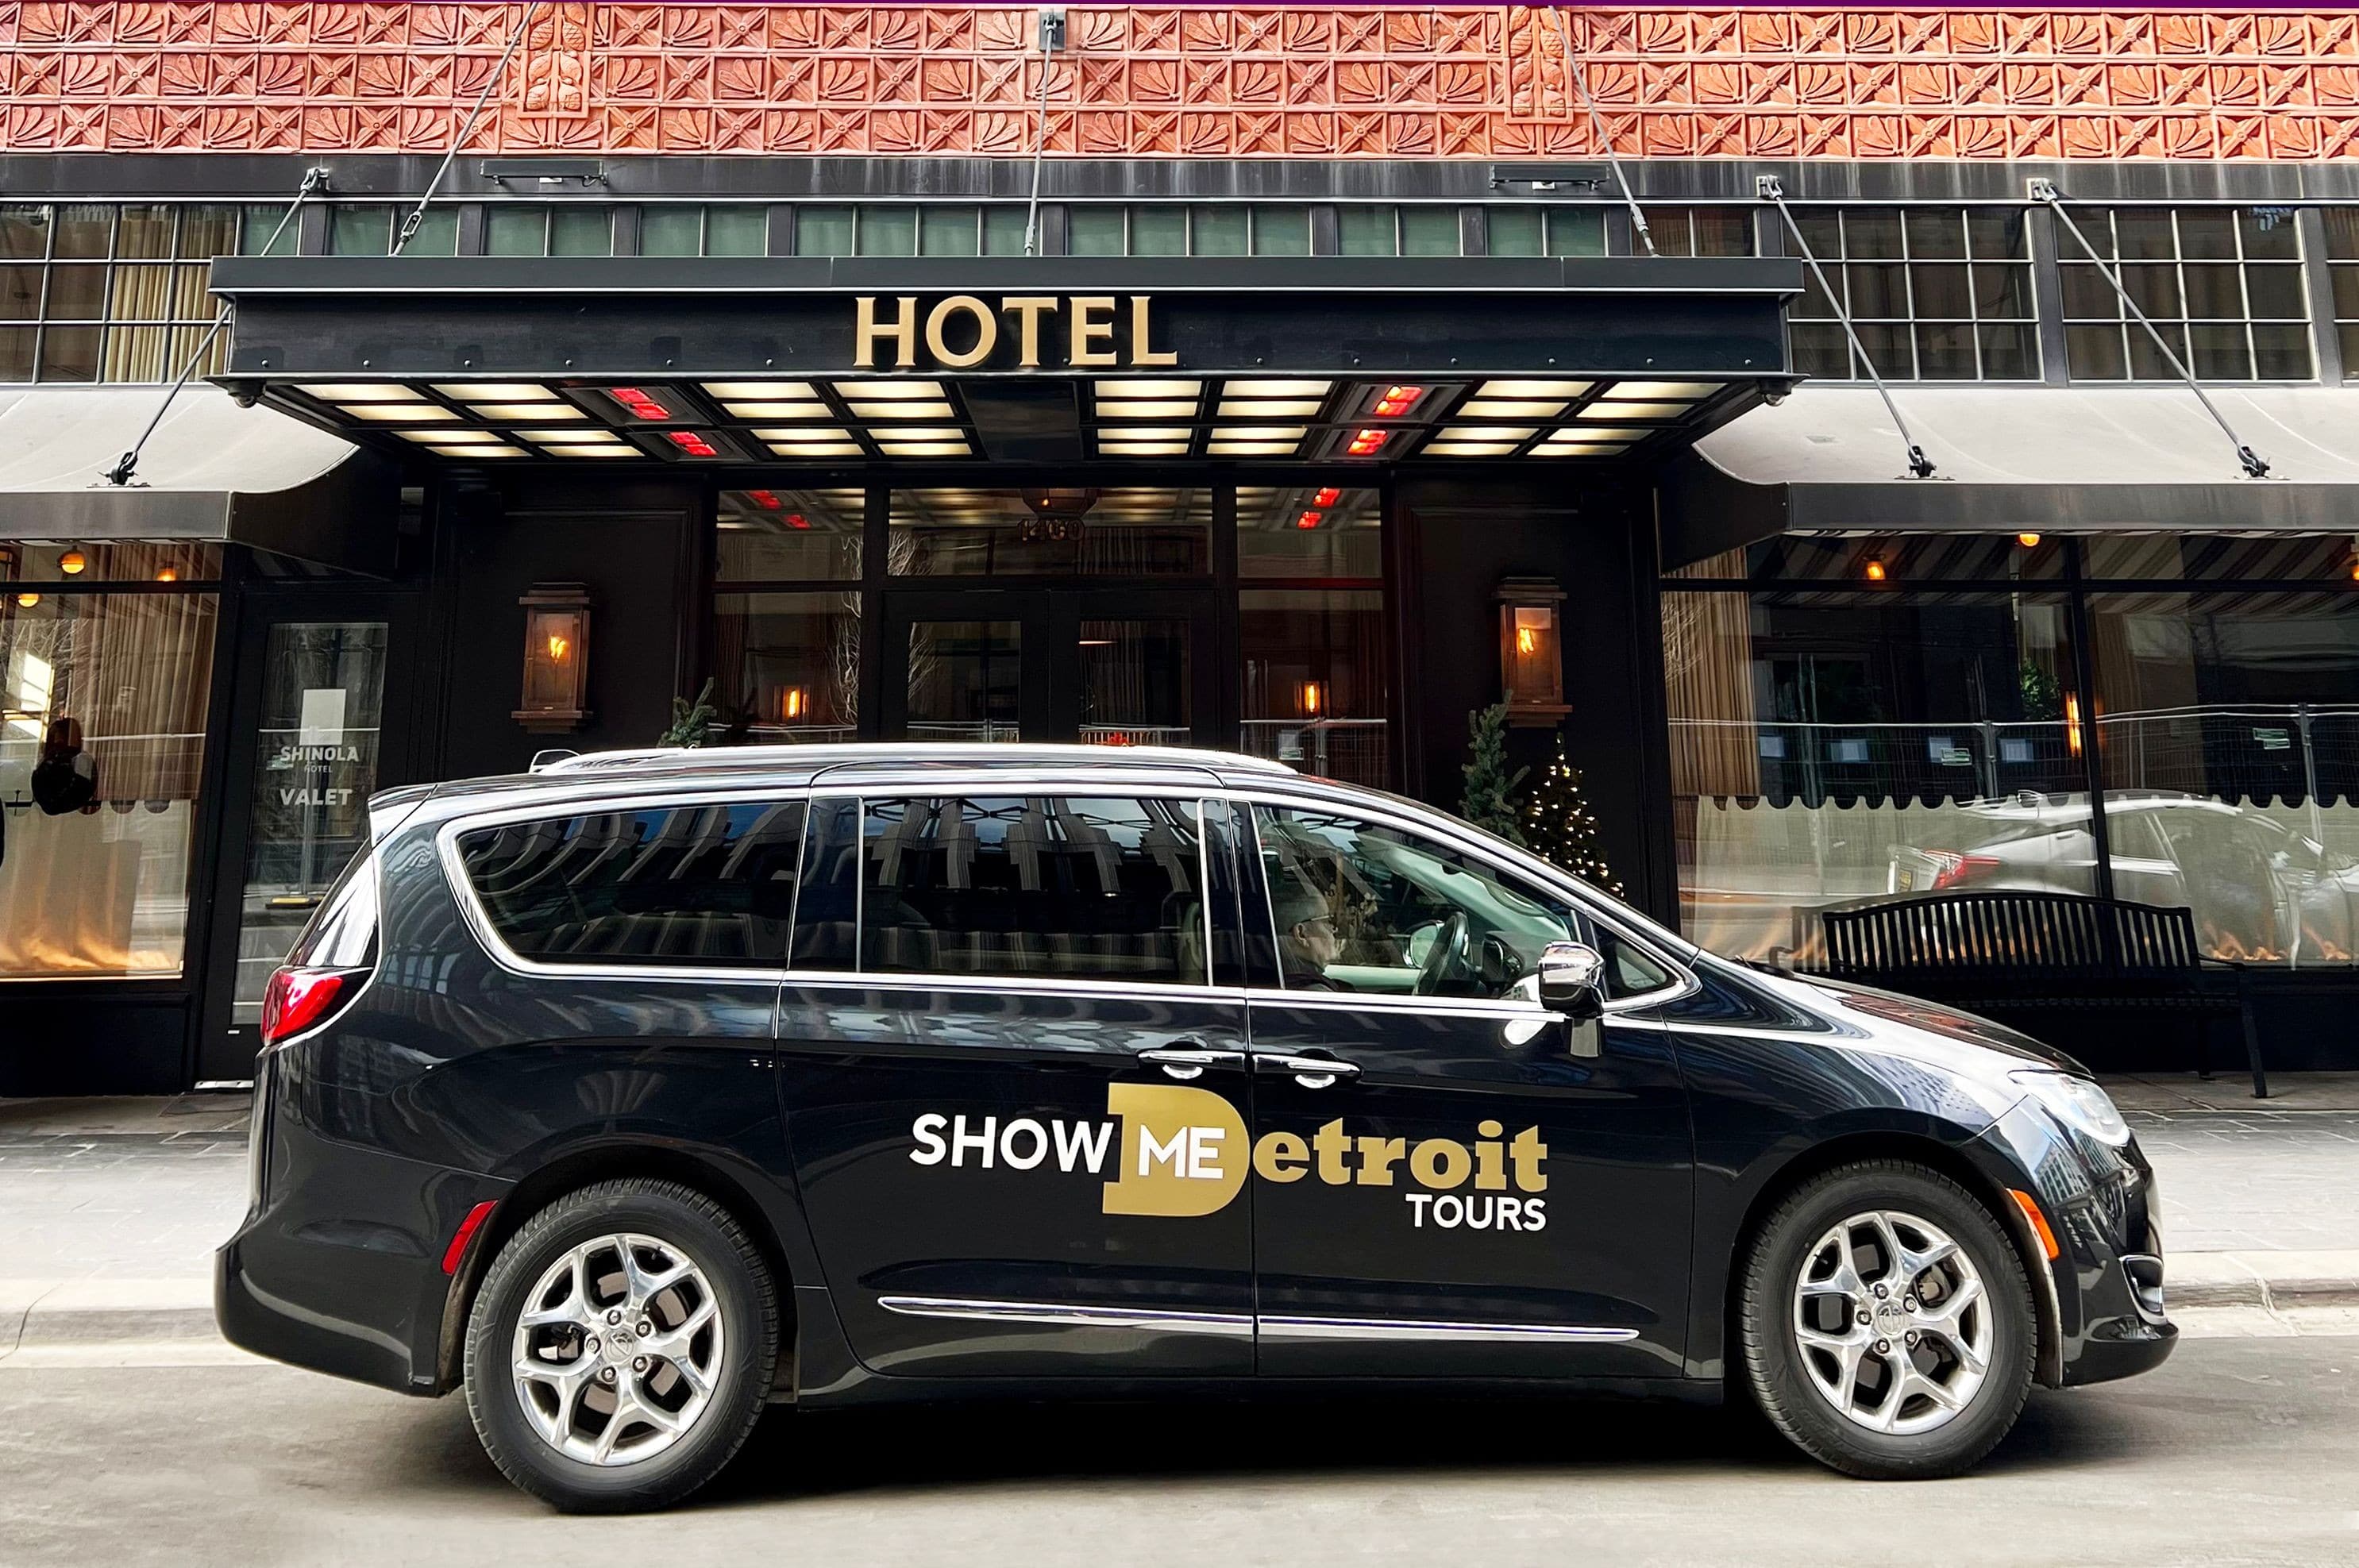 Show Me Detroit Tours picks up sightseeing tour guests at the Shinola Hotel on Grand River in Downtown Detroit.